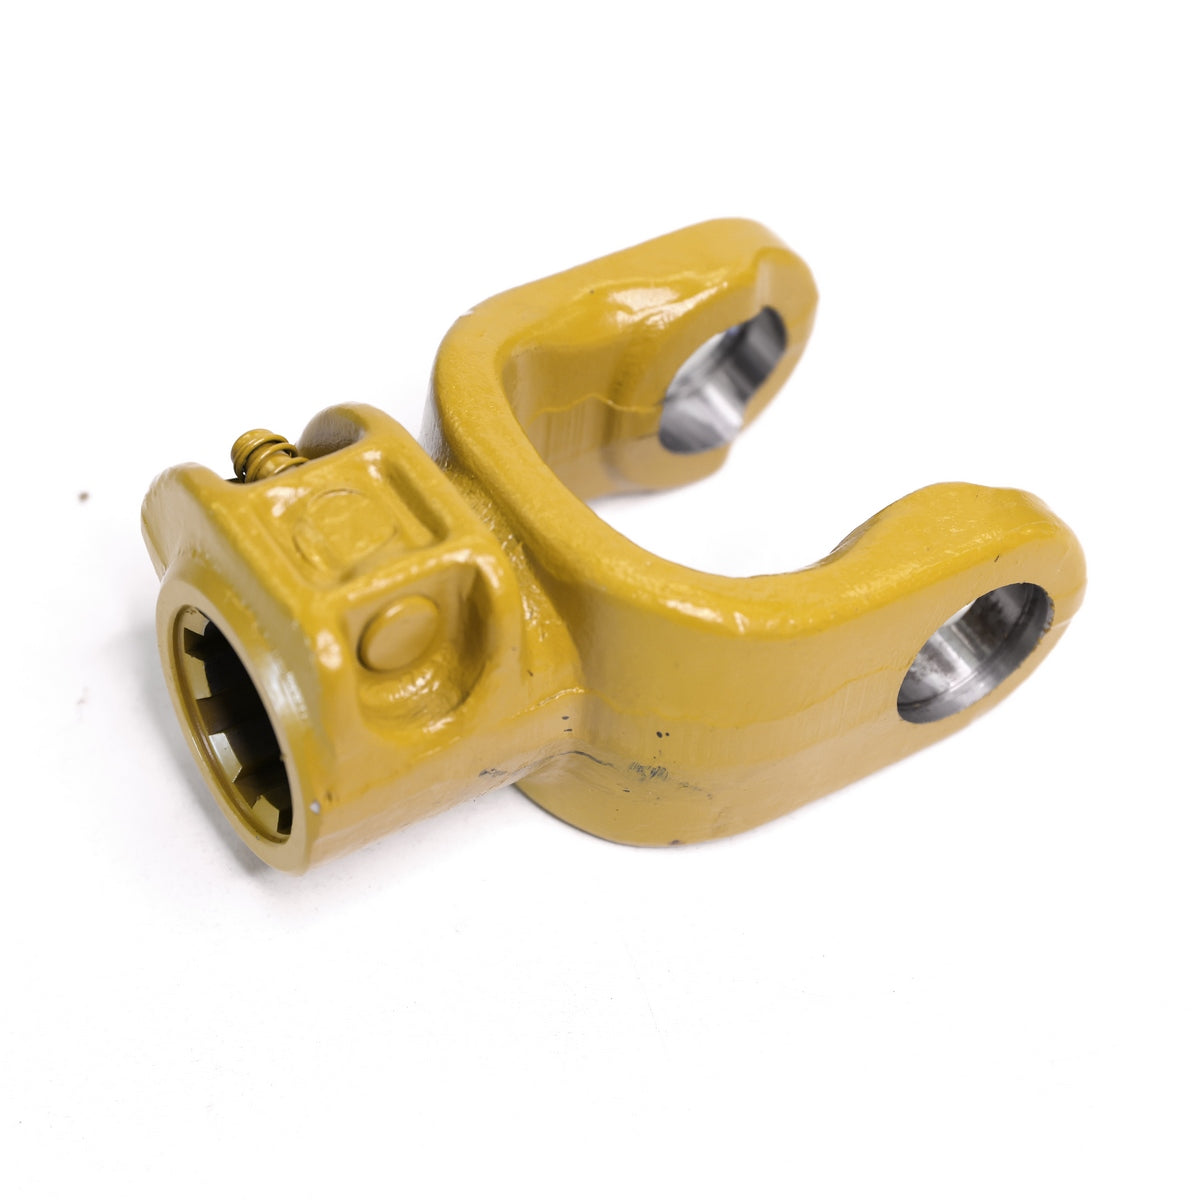 PTO Agriculture Quick Disconnect Yoke 30.2 x 80 8 splines - 38mm (1 1/2) H-112mm